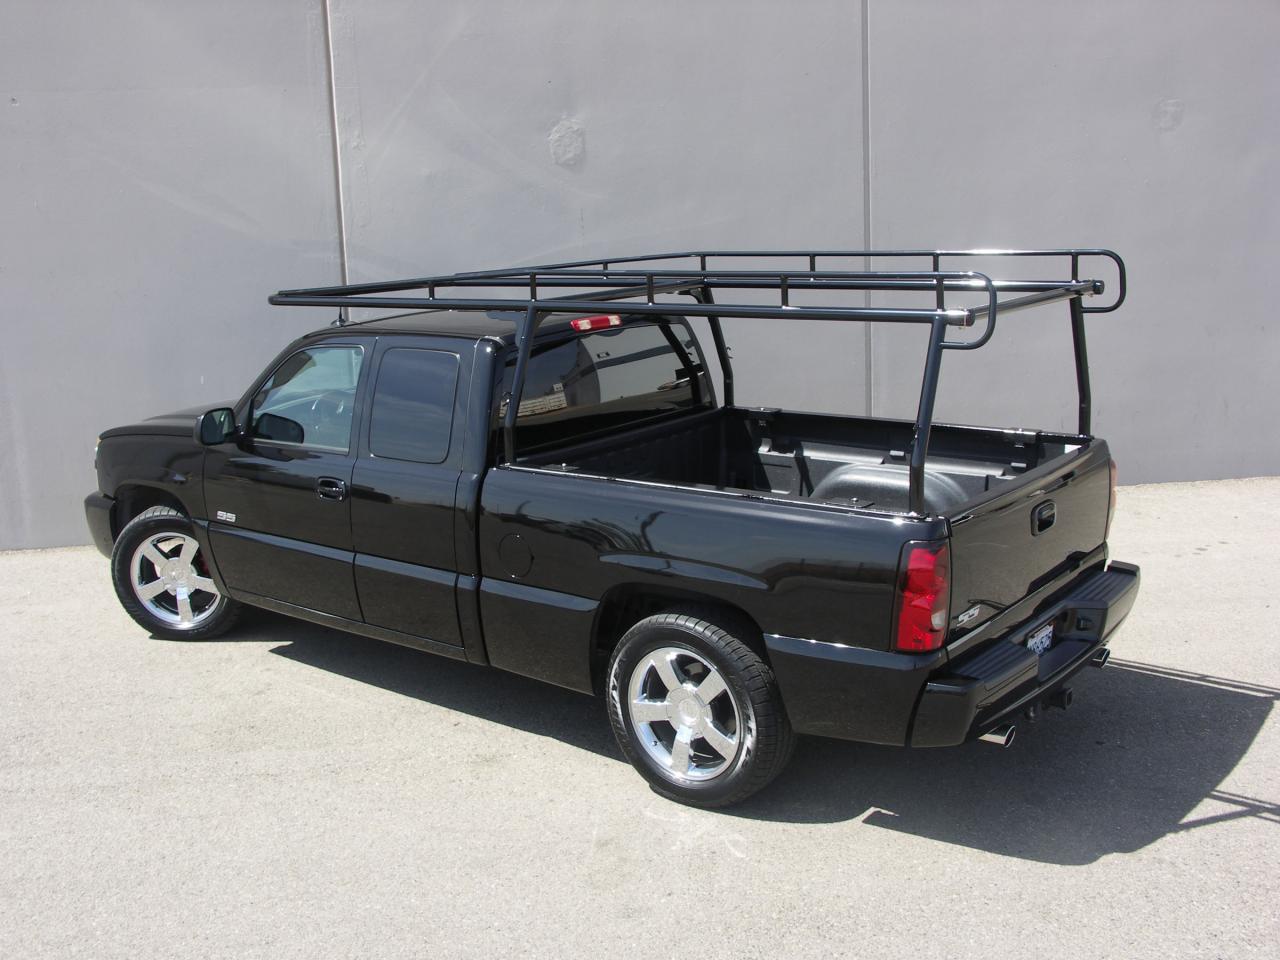 Class 250 Truck Rack is perfect for Contractors.